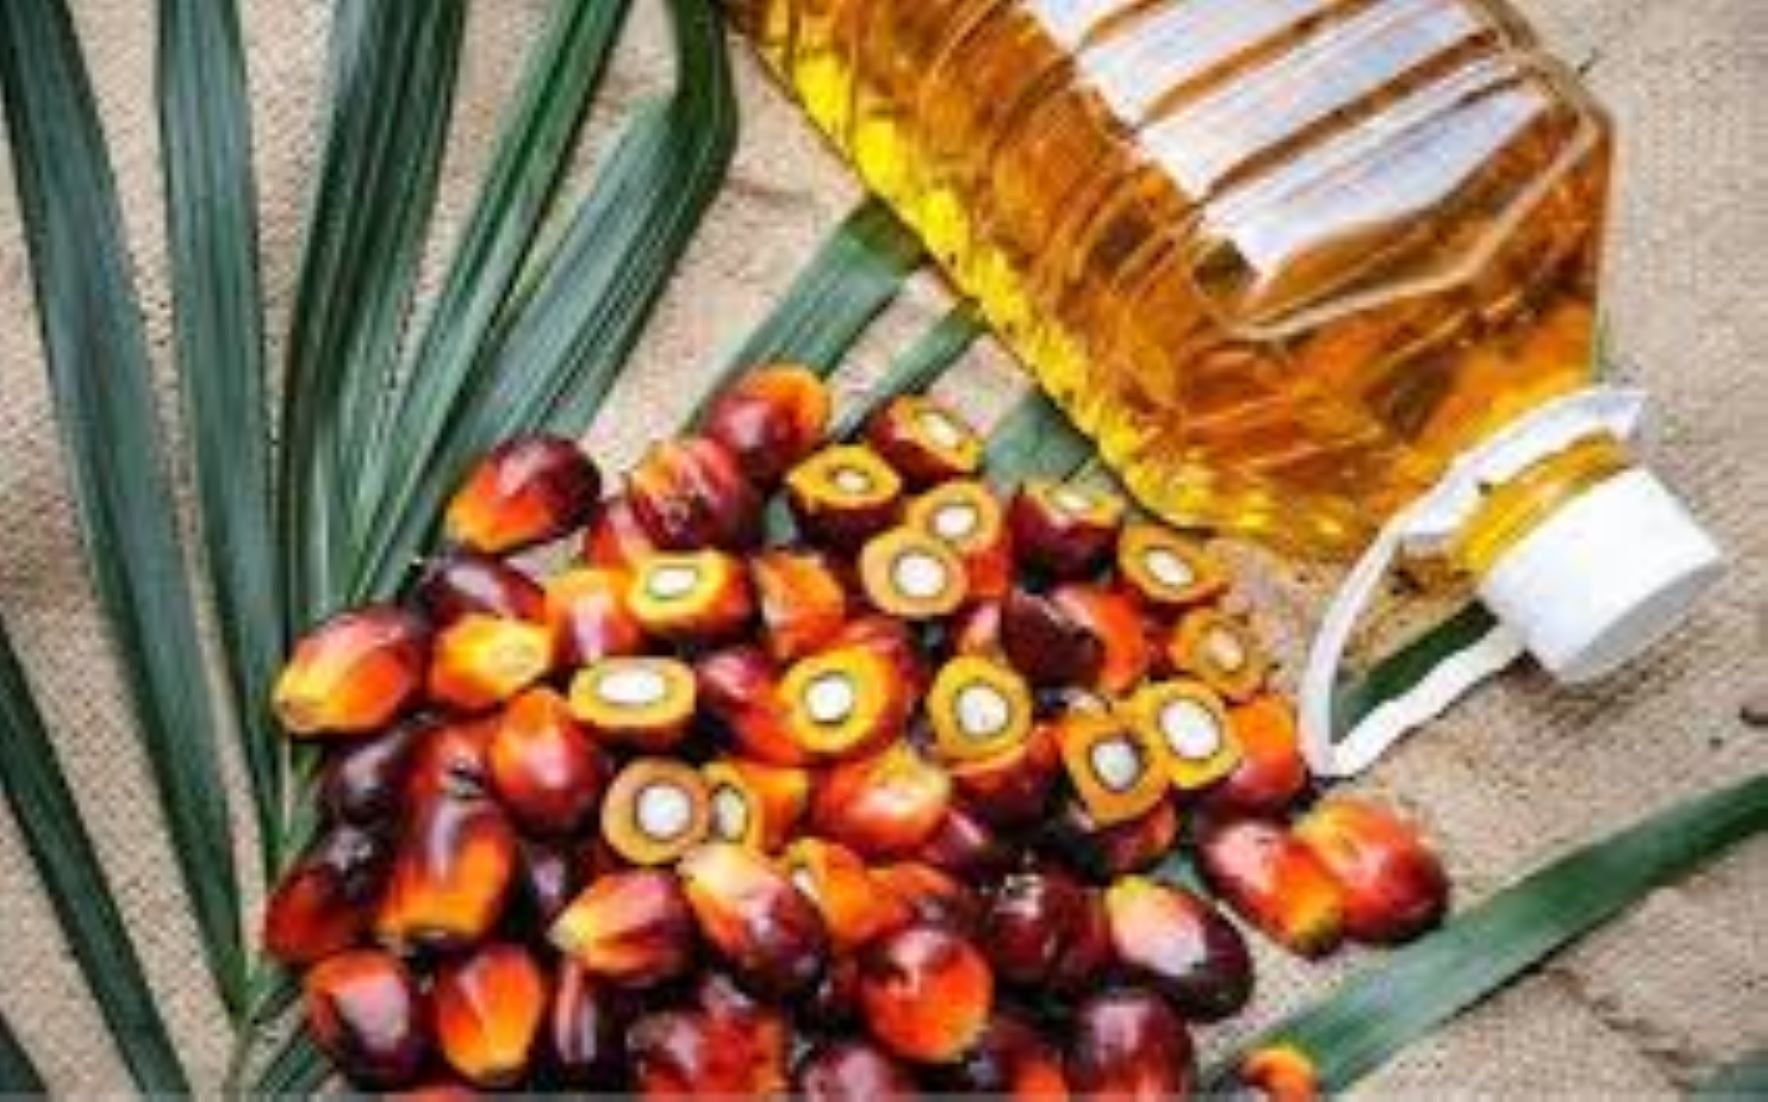 Malaysia’s Palm Oil Stocks Up 1.85 Percent In Apr